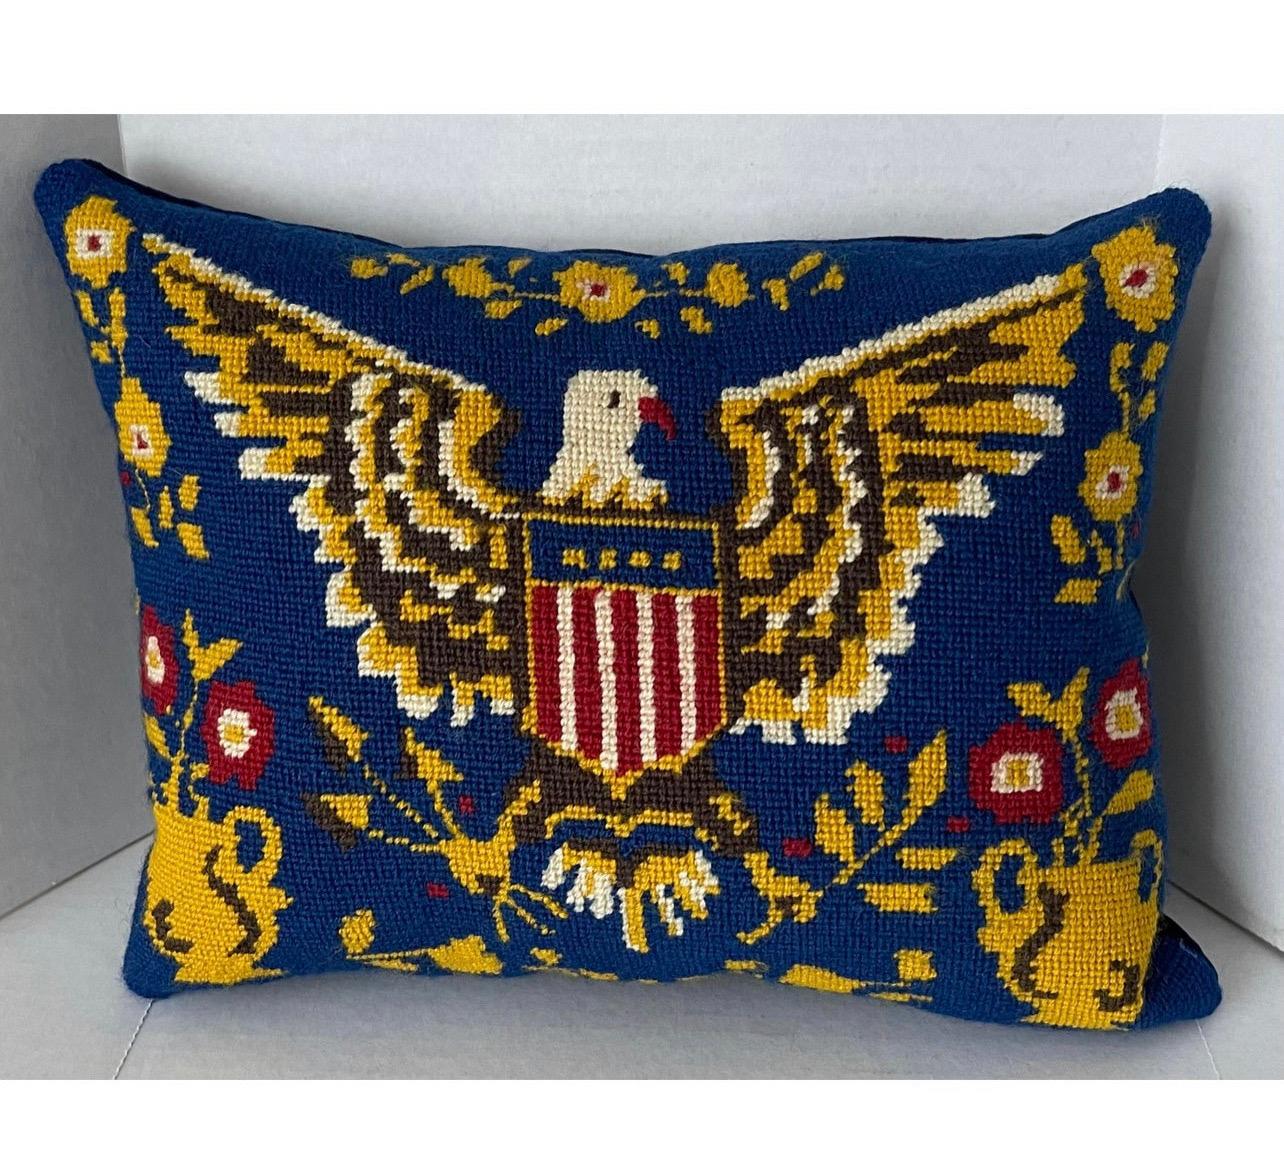 1970s American eagle motif wool needlepoint newly made into custom pillow. Sewn shut style backed in blue velvet. Colors on needlepoint remain bright.